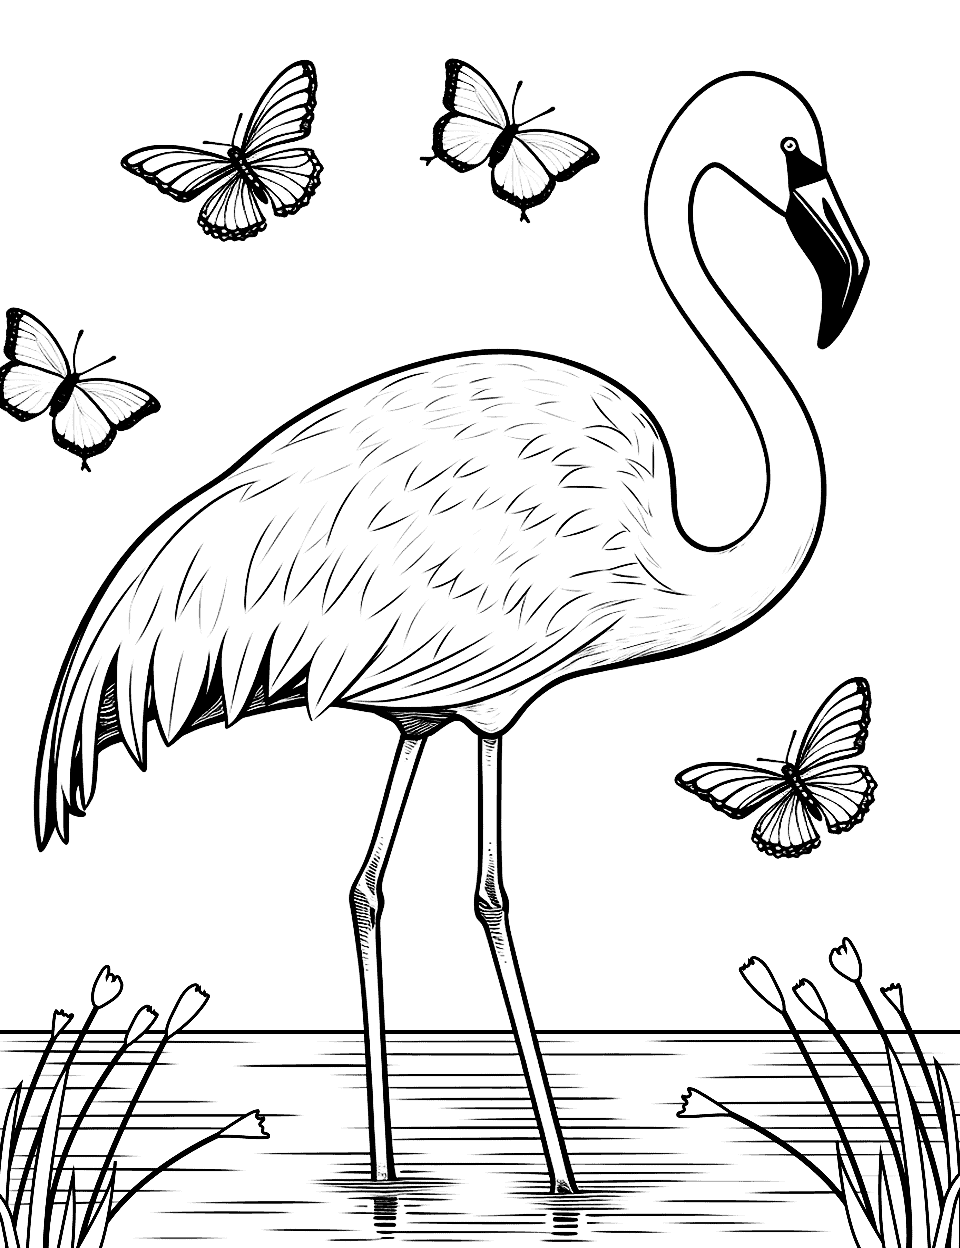 Flamingo and the Butterflies Coloring Page - A charming scene of a flamingo among playful butterflies fluttering around.